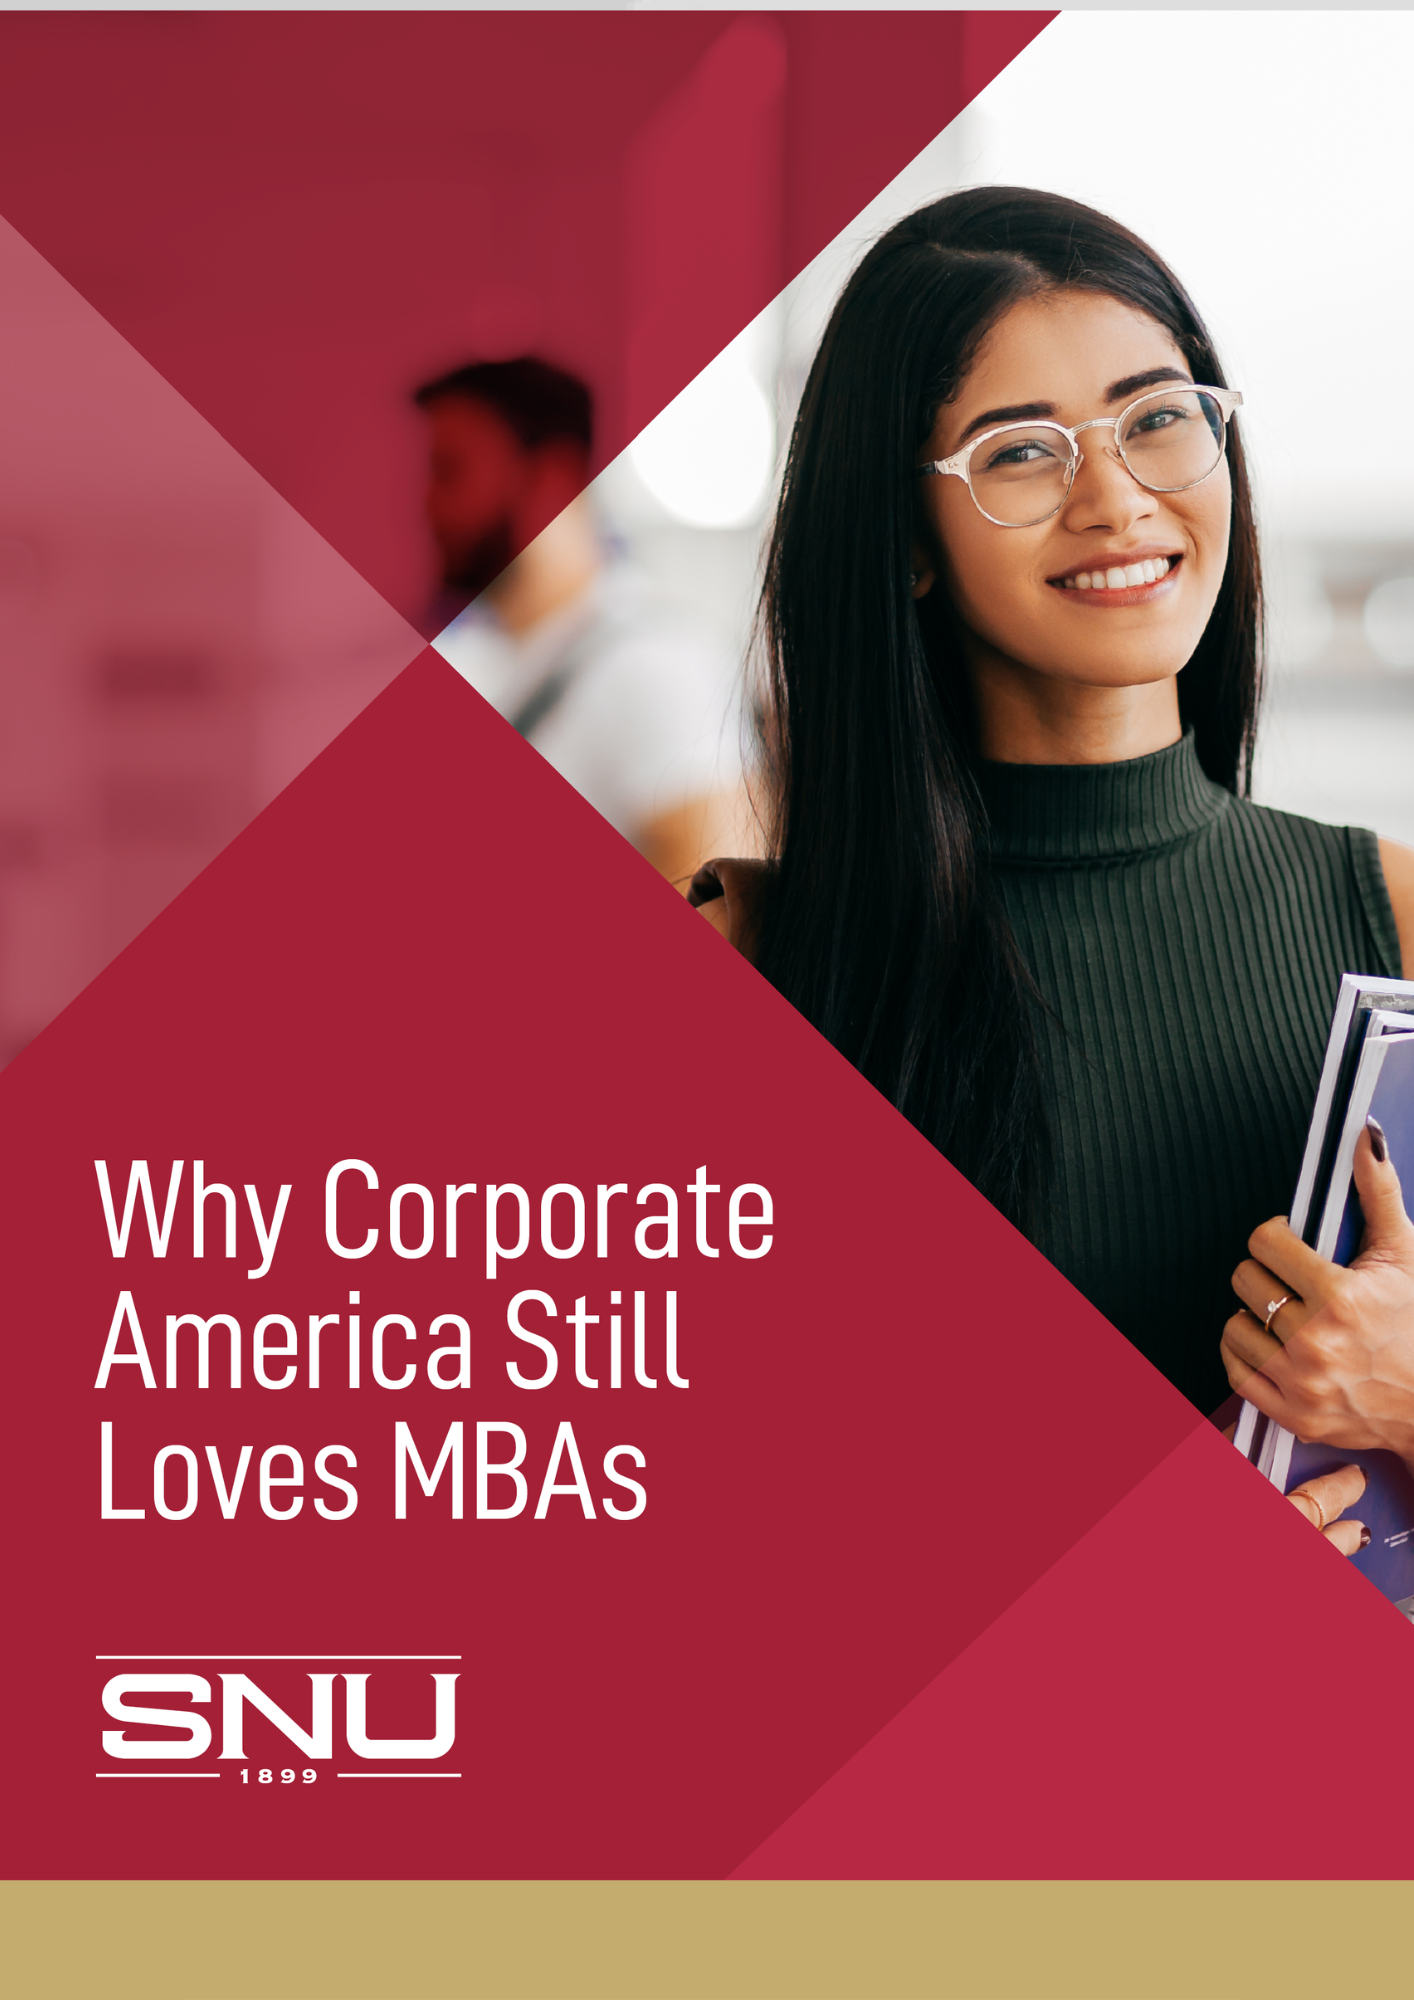 Why corporate America loves MBAs - student smiling at the camera